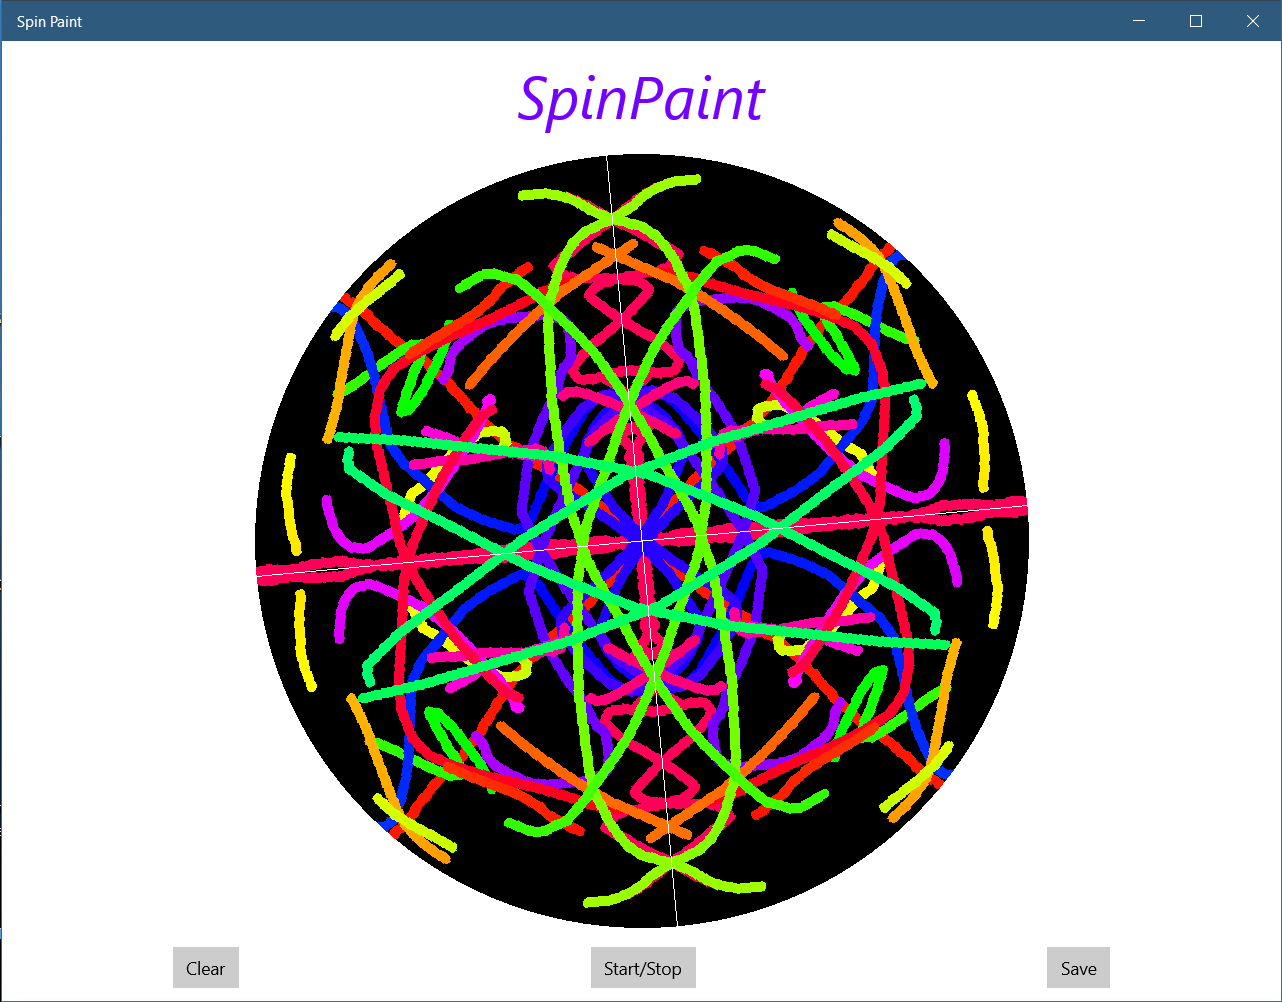 Spin Paint